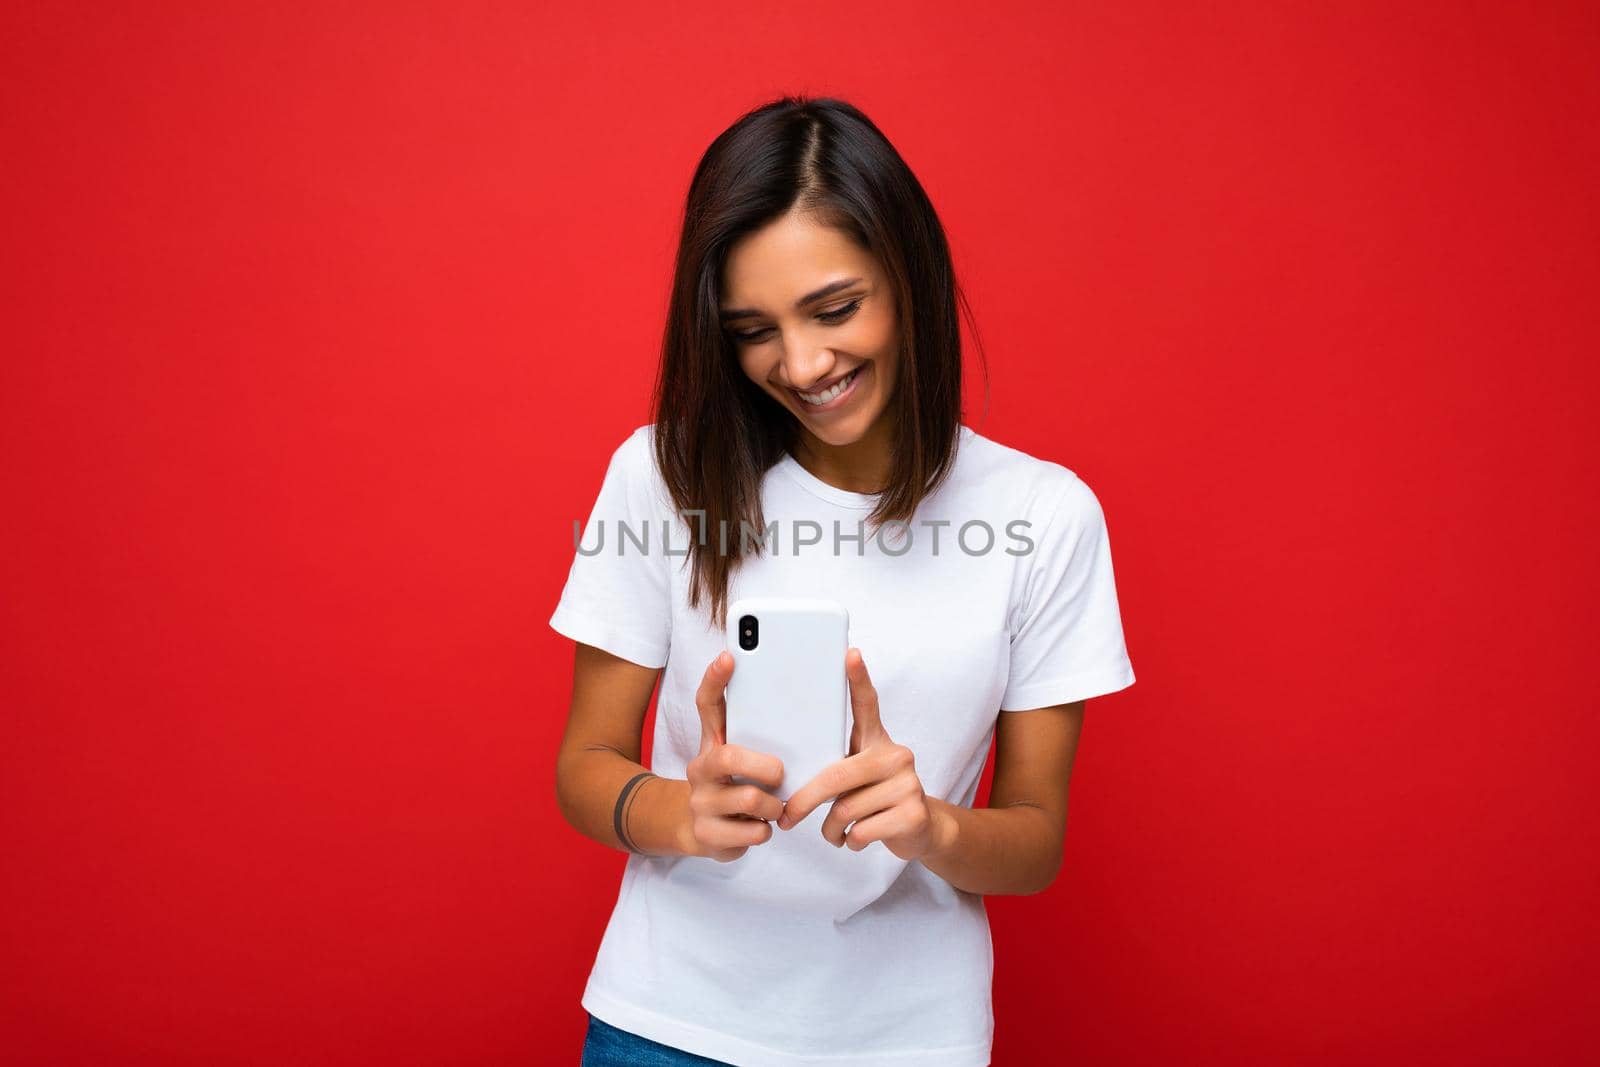 Photo shot of attractive positive good looking young woman wearing casual stylish outfit poising isolated on background with empty space holding in hand and using mobile phone messaging sms looking at smartphone display screen.